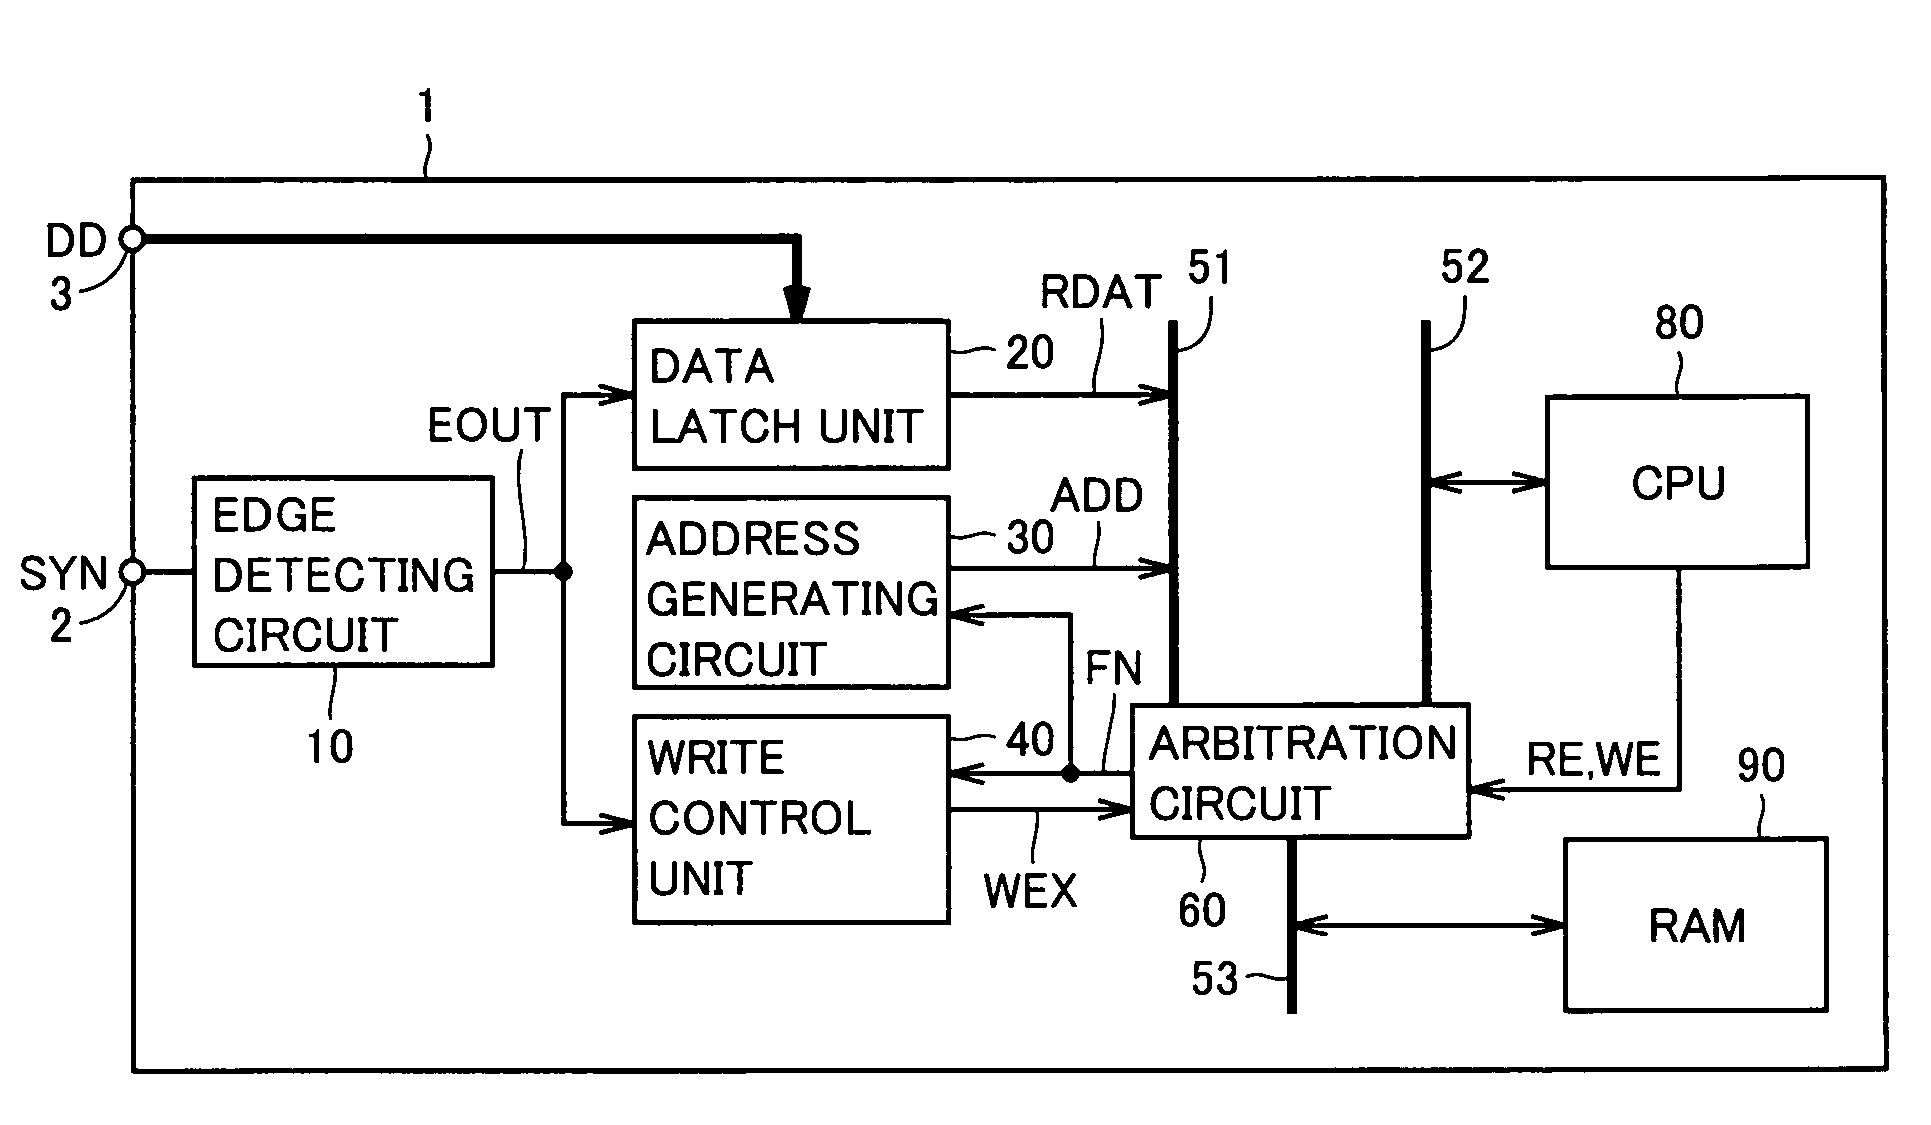 Microcomputer minimizing influence of bus contention